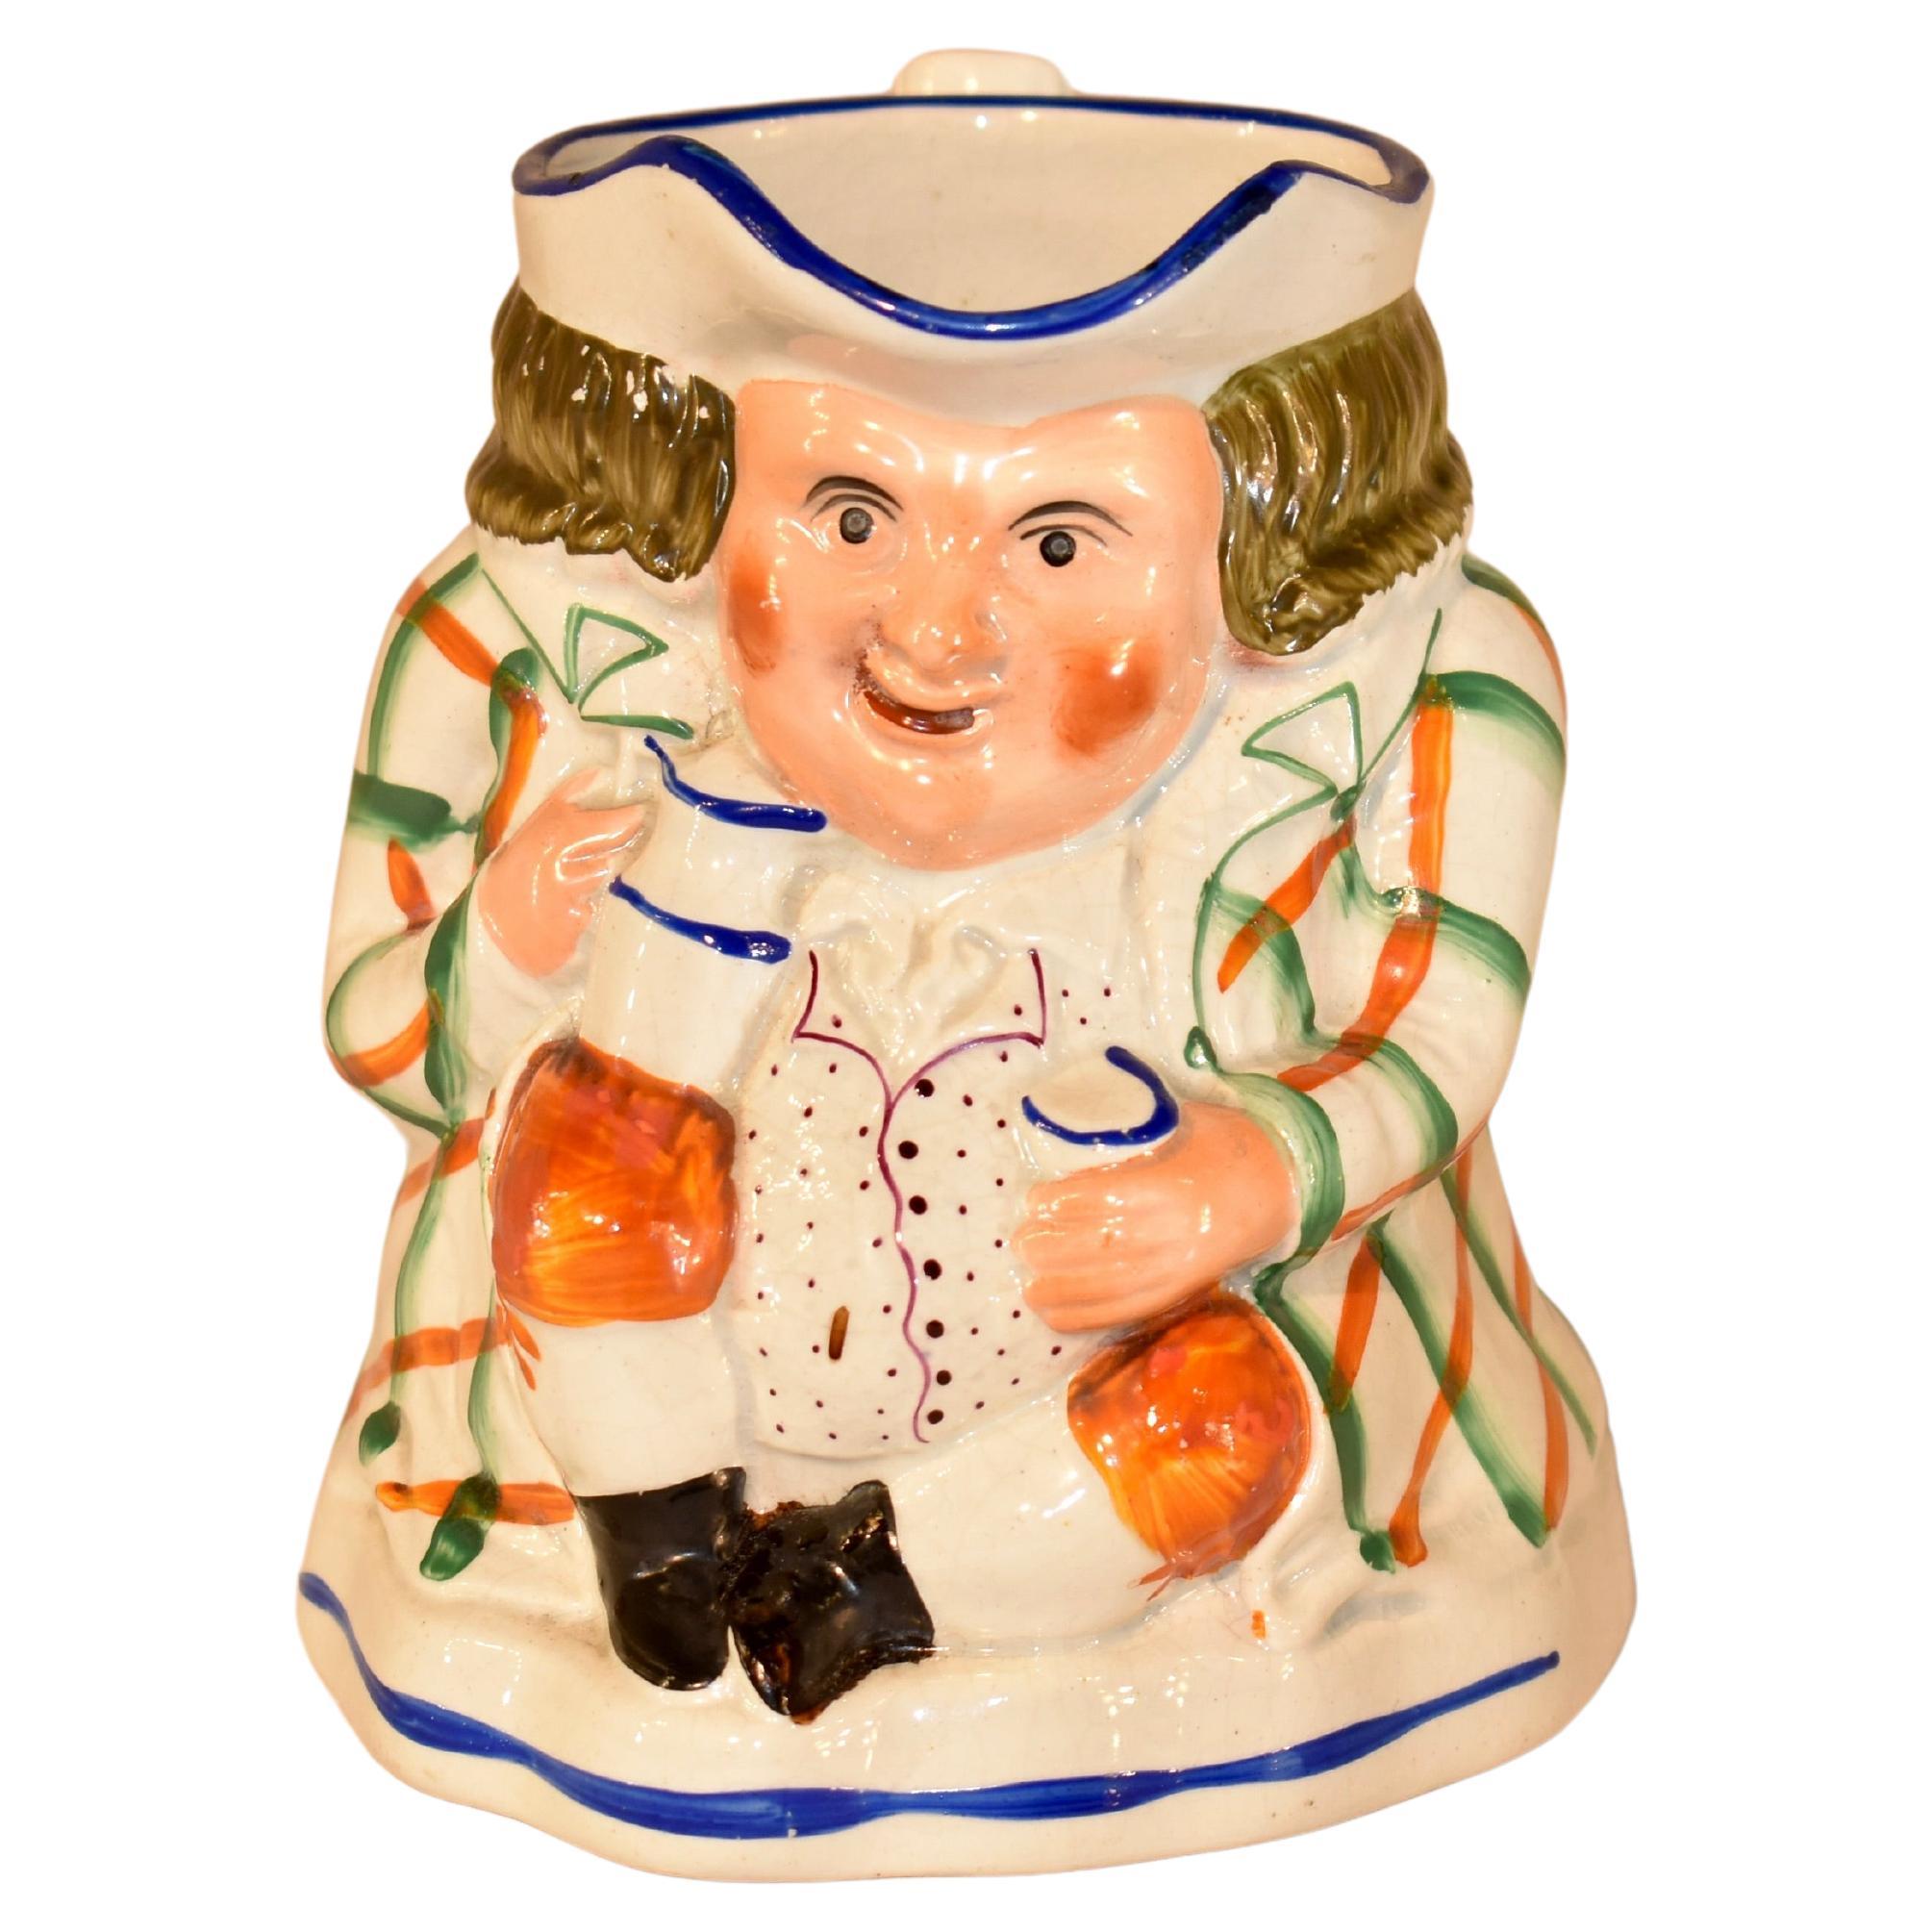 19th Century Toby Jug with Plaid Jacket For Sale